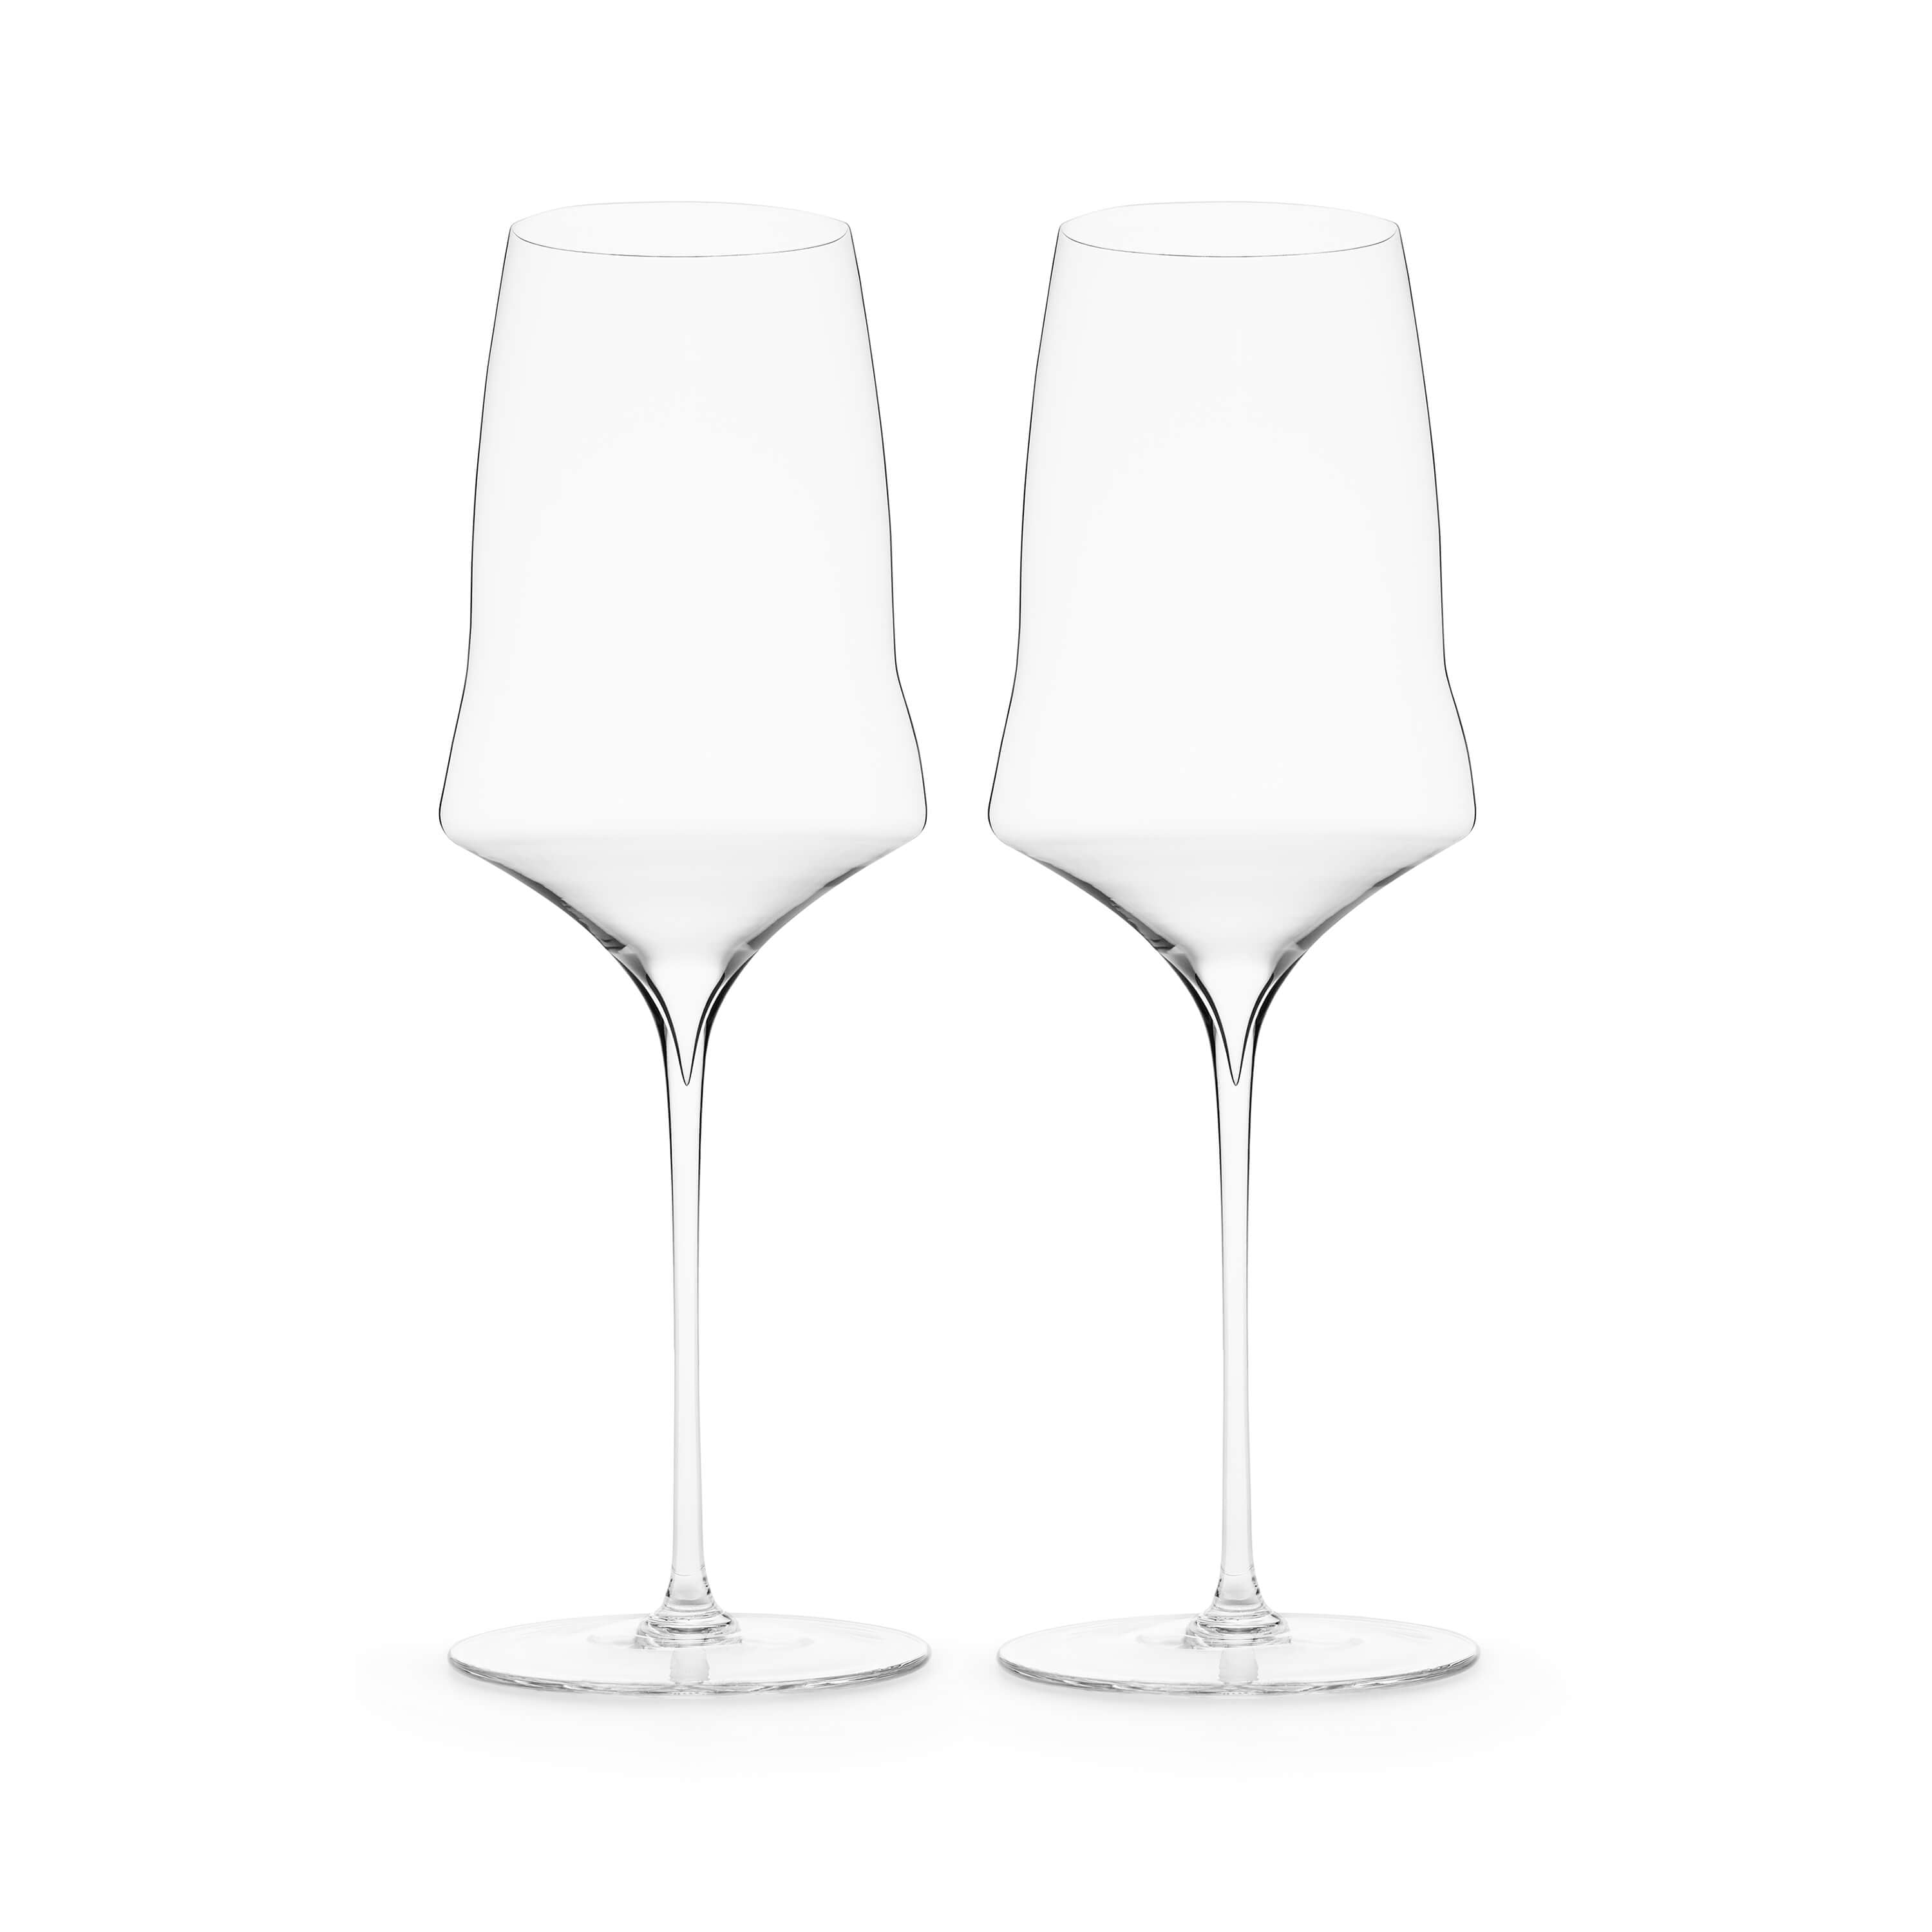 Riedel Wine Friendly White Wine and Champagne Glass, Set of 2 